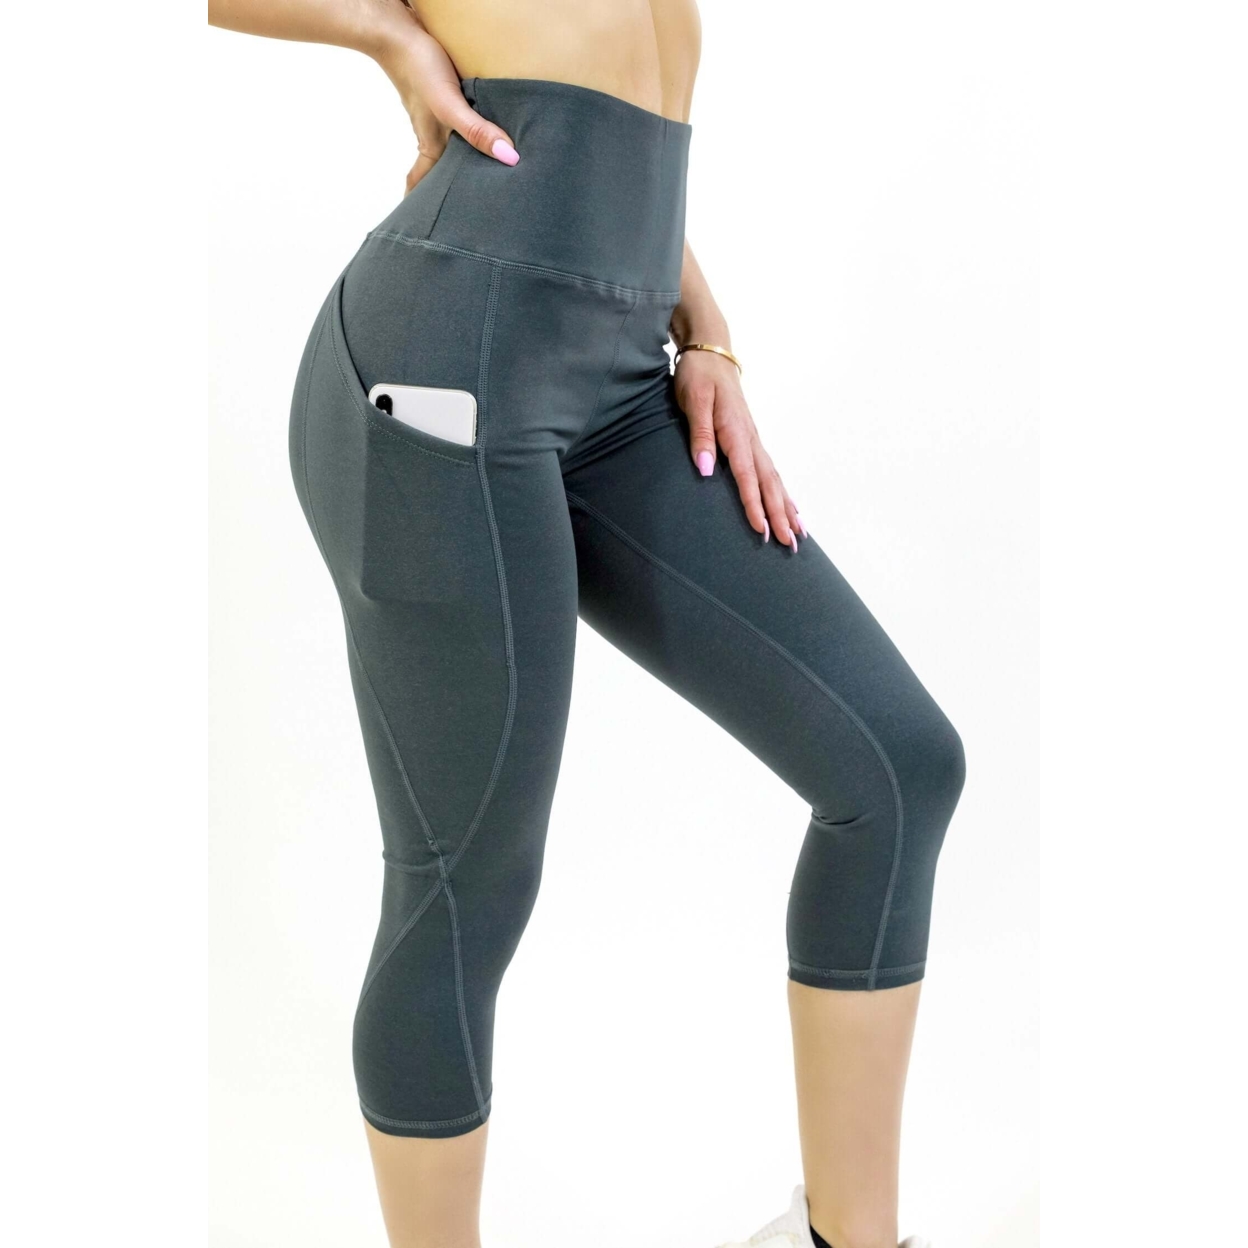 Seajoy Athletic High-Waisted Capri Leggings With Hip Pockets - Olive, Small